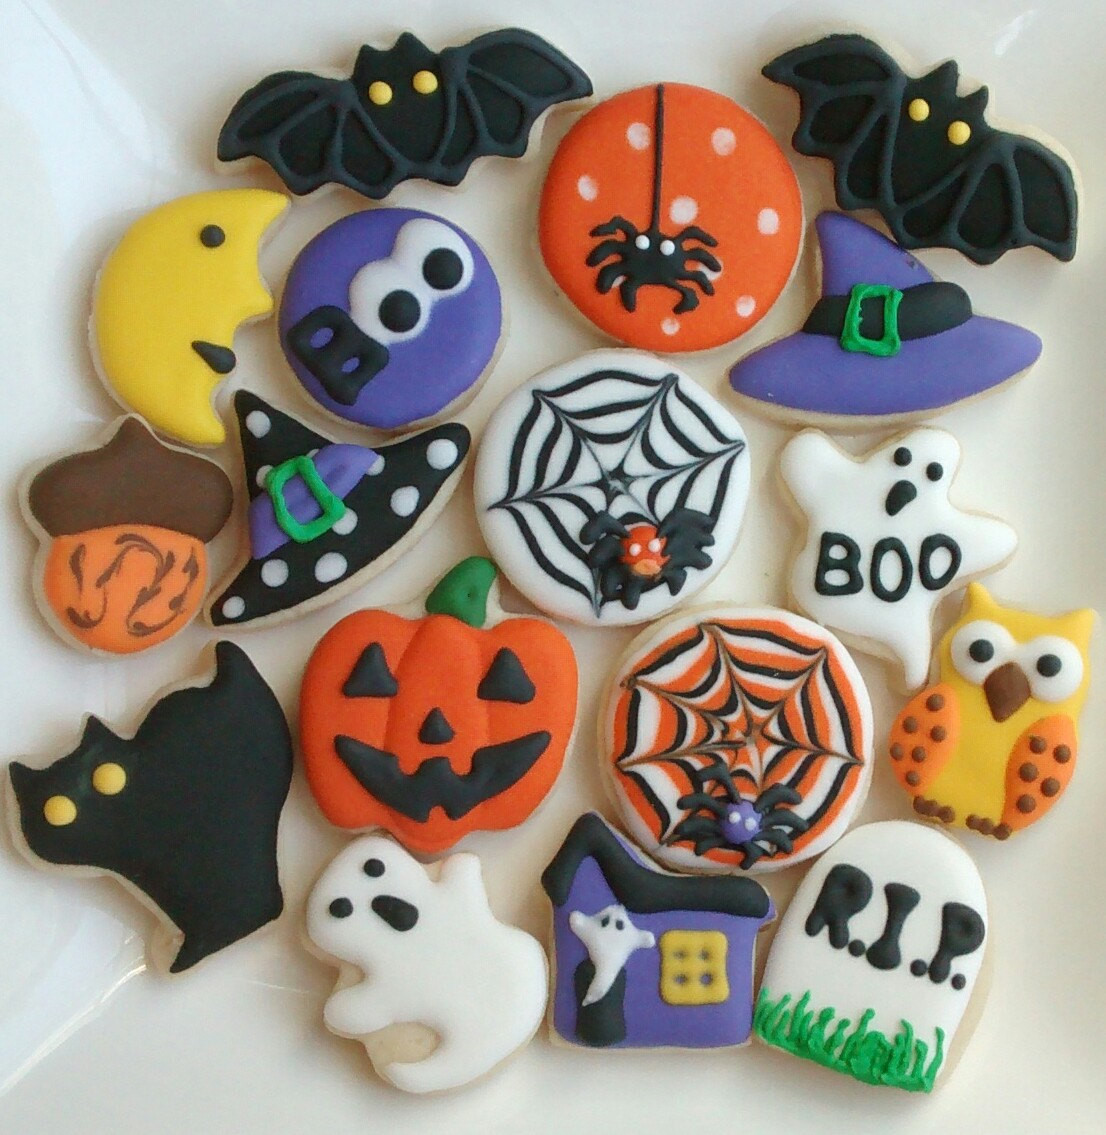 Halloween Decorated Cookies
 Halloween sugar cookies mini or large decorated with royal